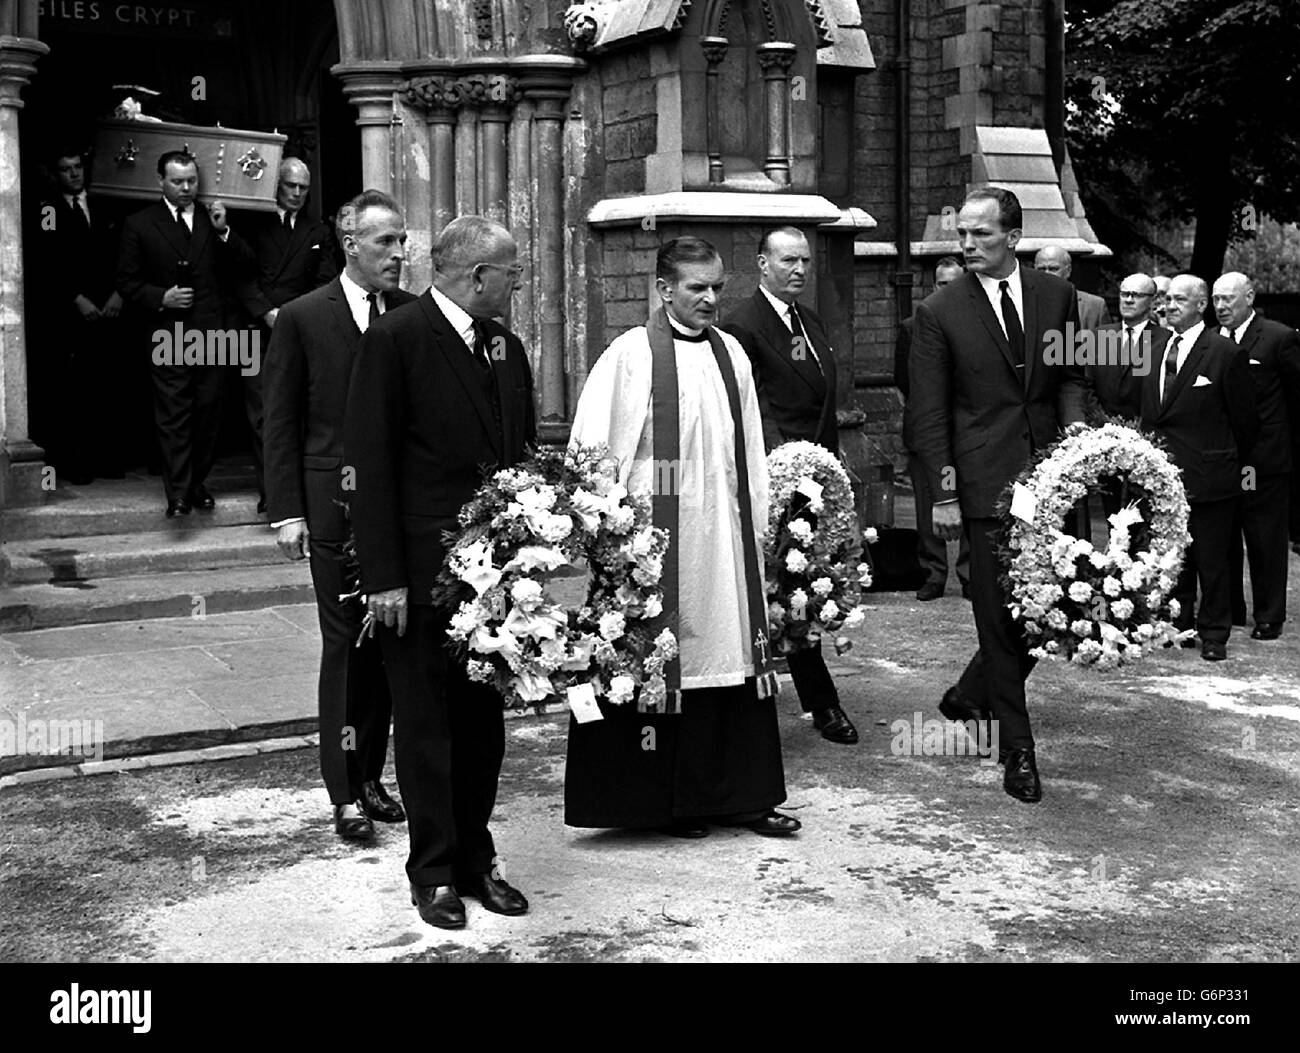 The pall-bearers carrying wreaths precede the coffin from St.Giles's Church, Camberwell, London, at the funeral of former world boxing champion Freddie Mills. From left to right, the pall-bearers are - Bruce Forsyth: Jack Solomons: Teddy Waltham, secretary of the British Boxing Board of Control and Henry Cooper, British heavyweight champion. Stock Photo